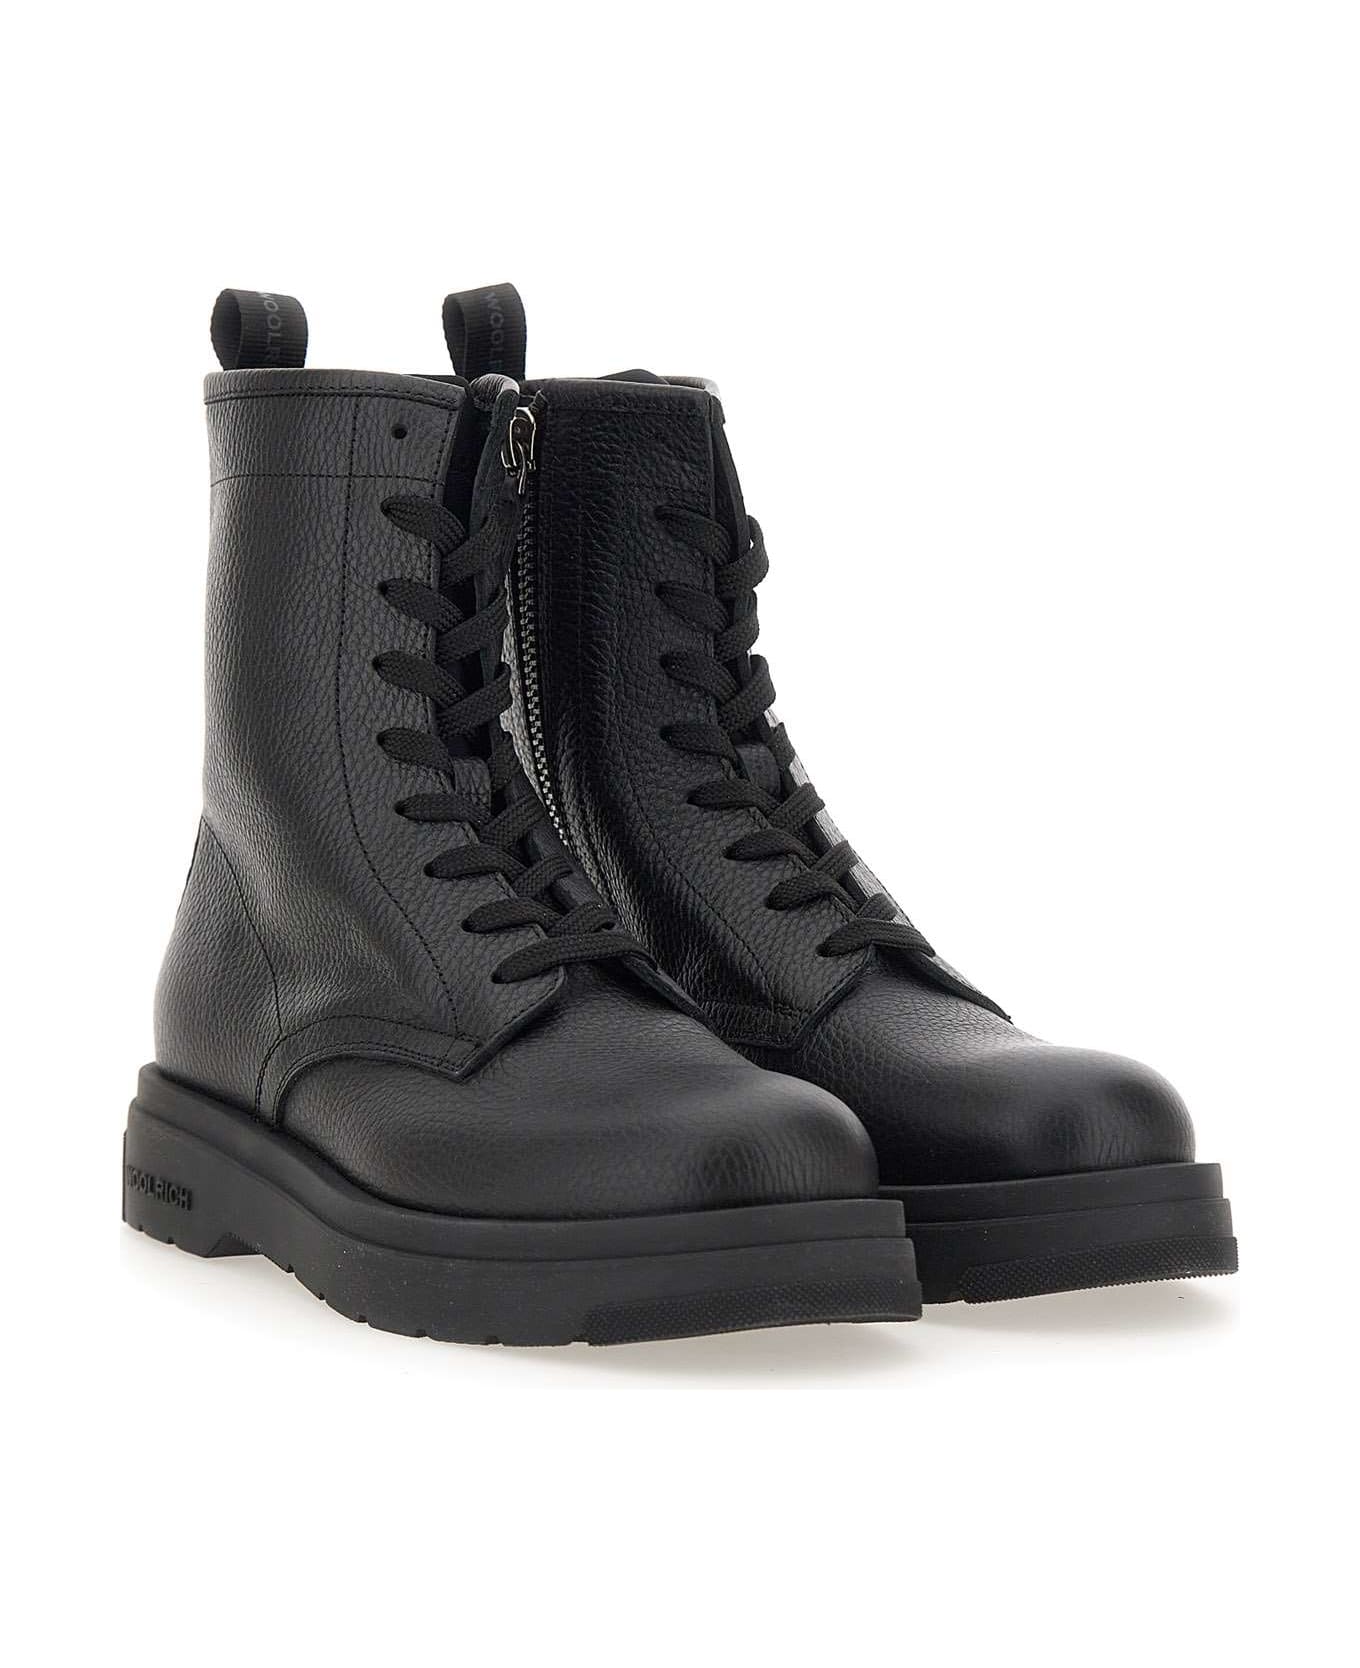 Woolrich New City' Tumbled Leather Boots - Black